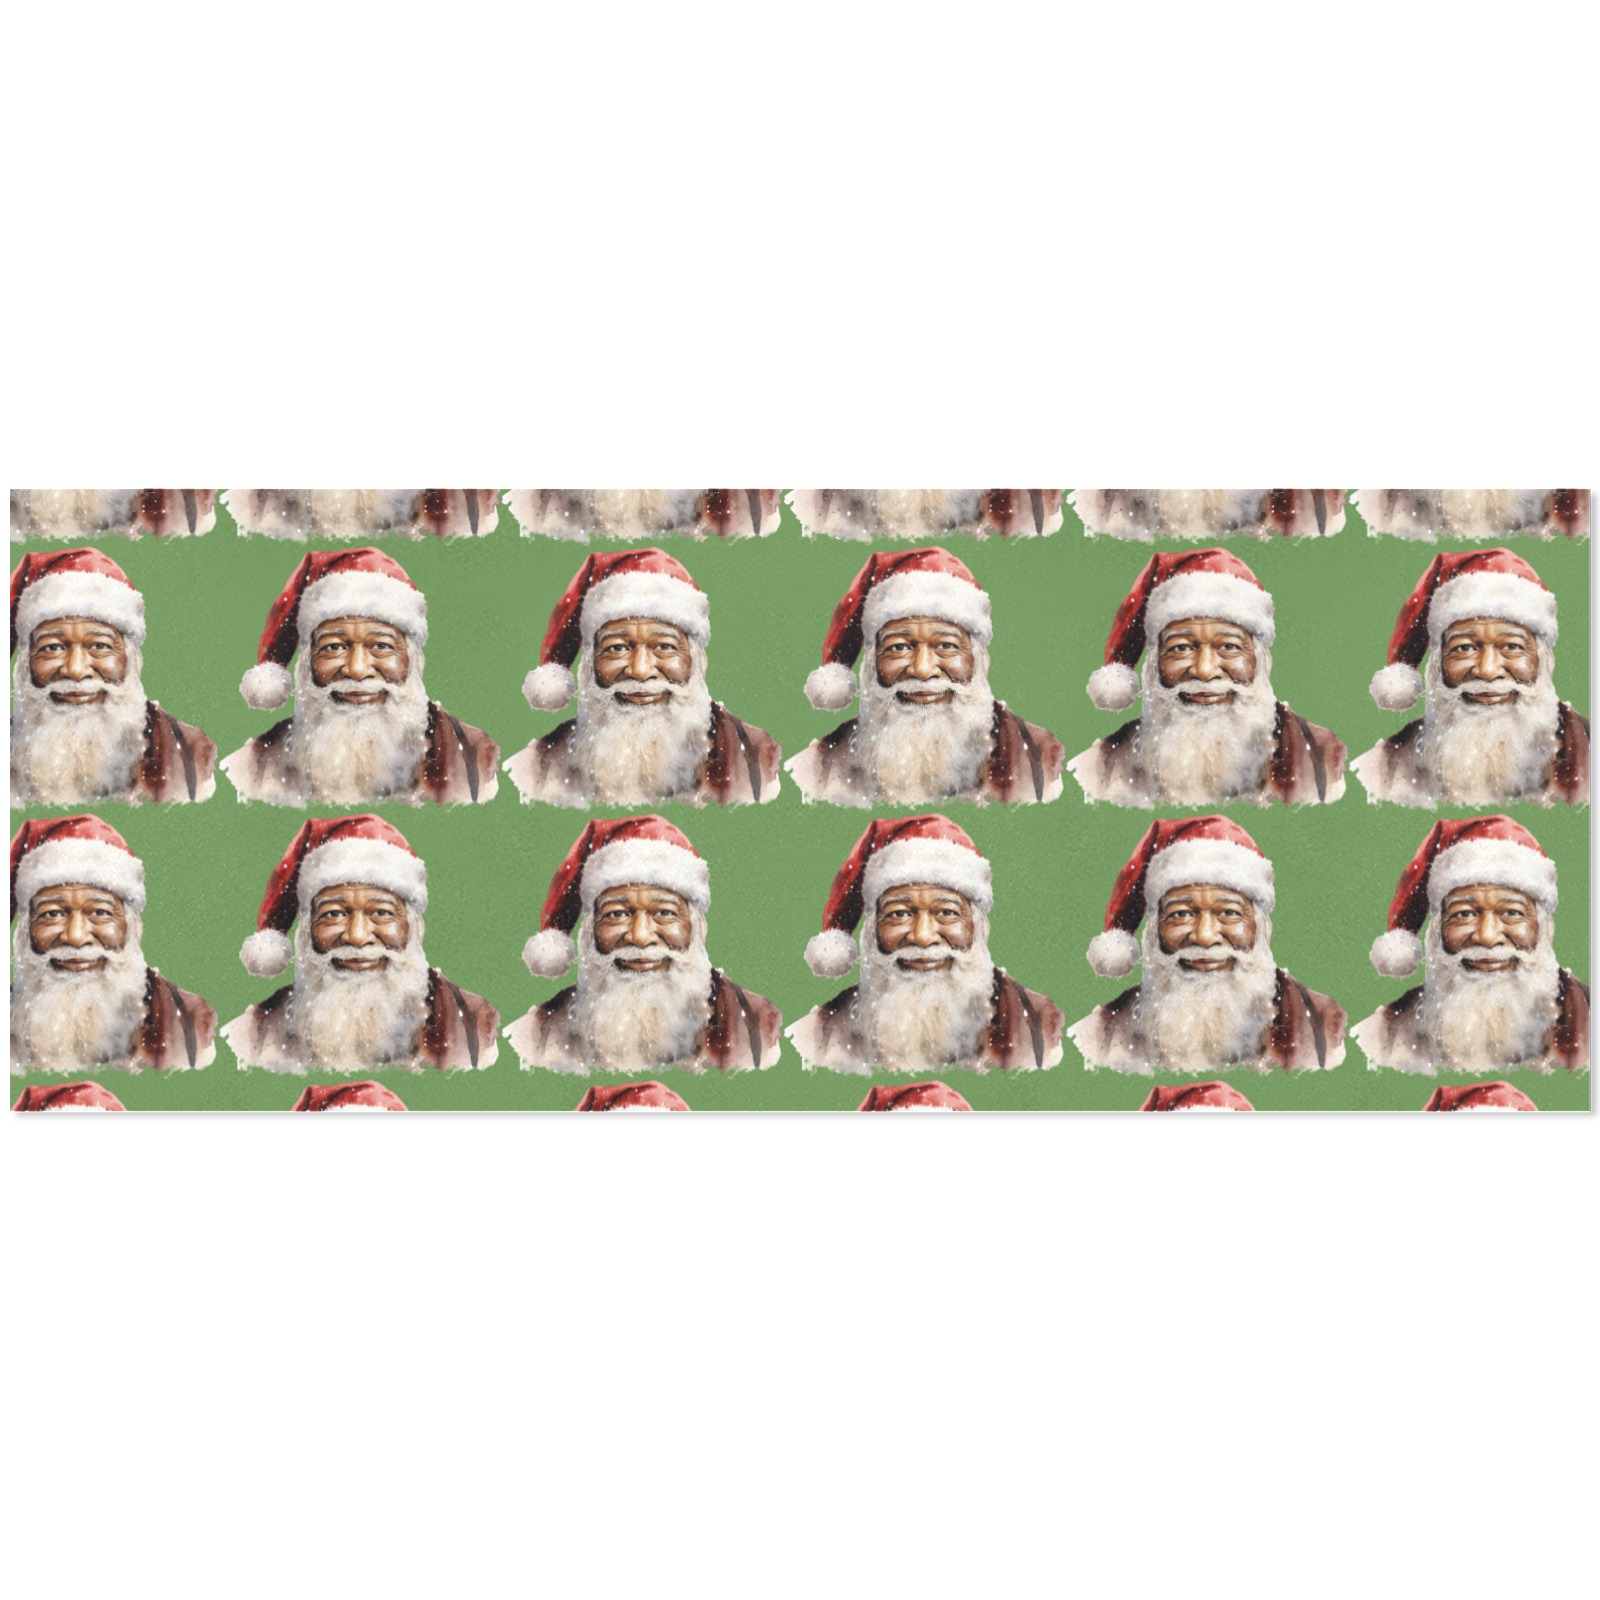 Santa Claus Gift Wrapping Paper 58"x 23" (4 Rolls)